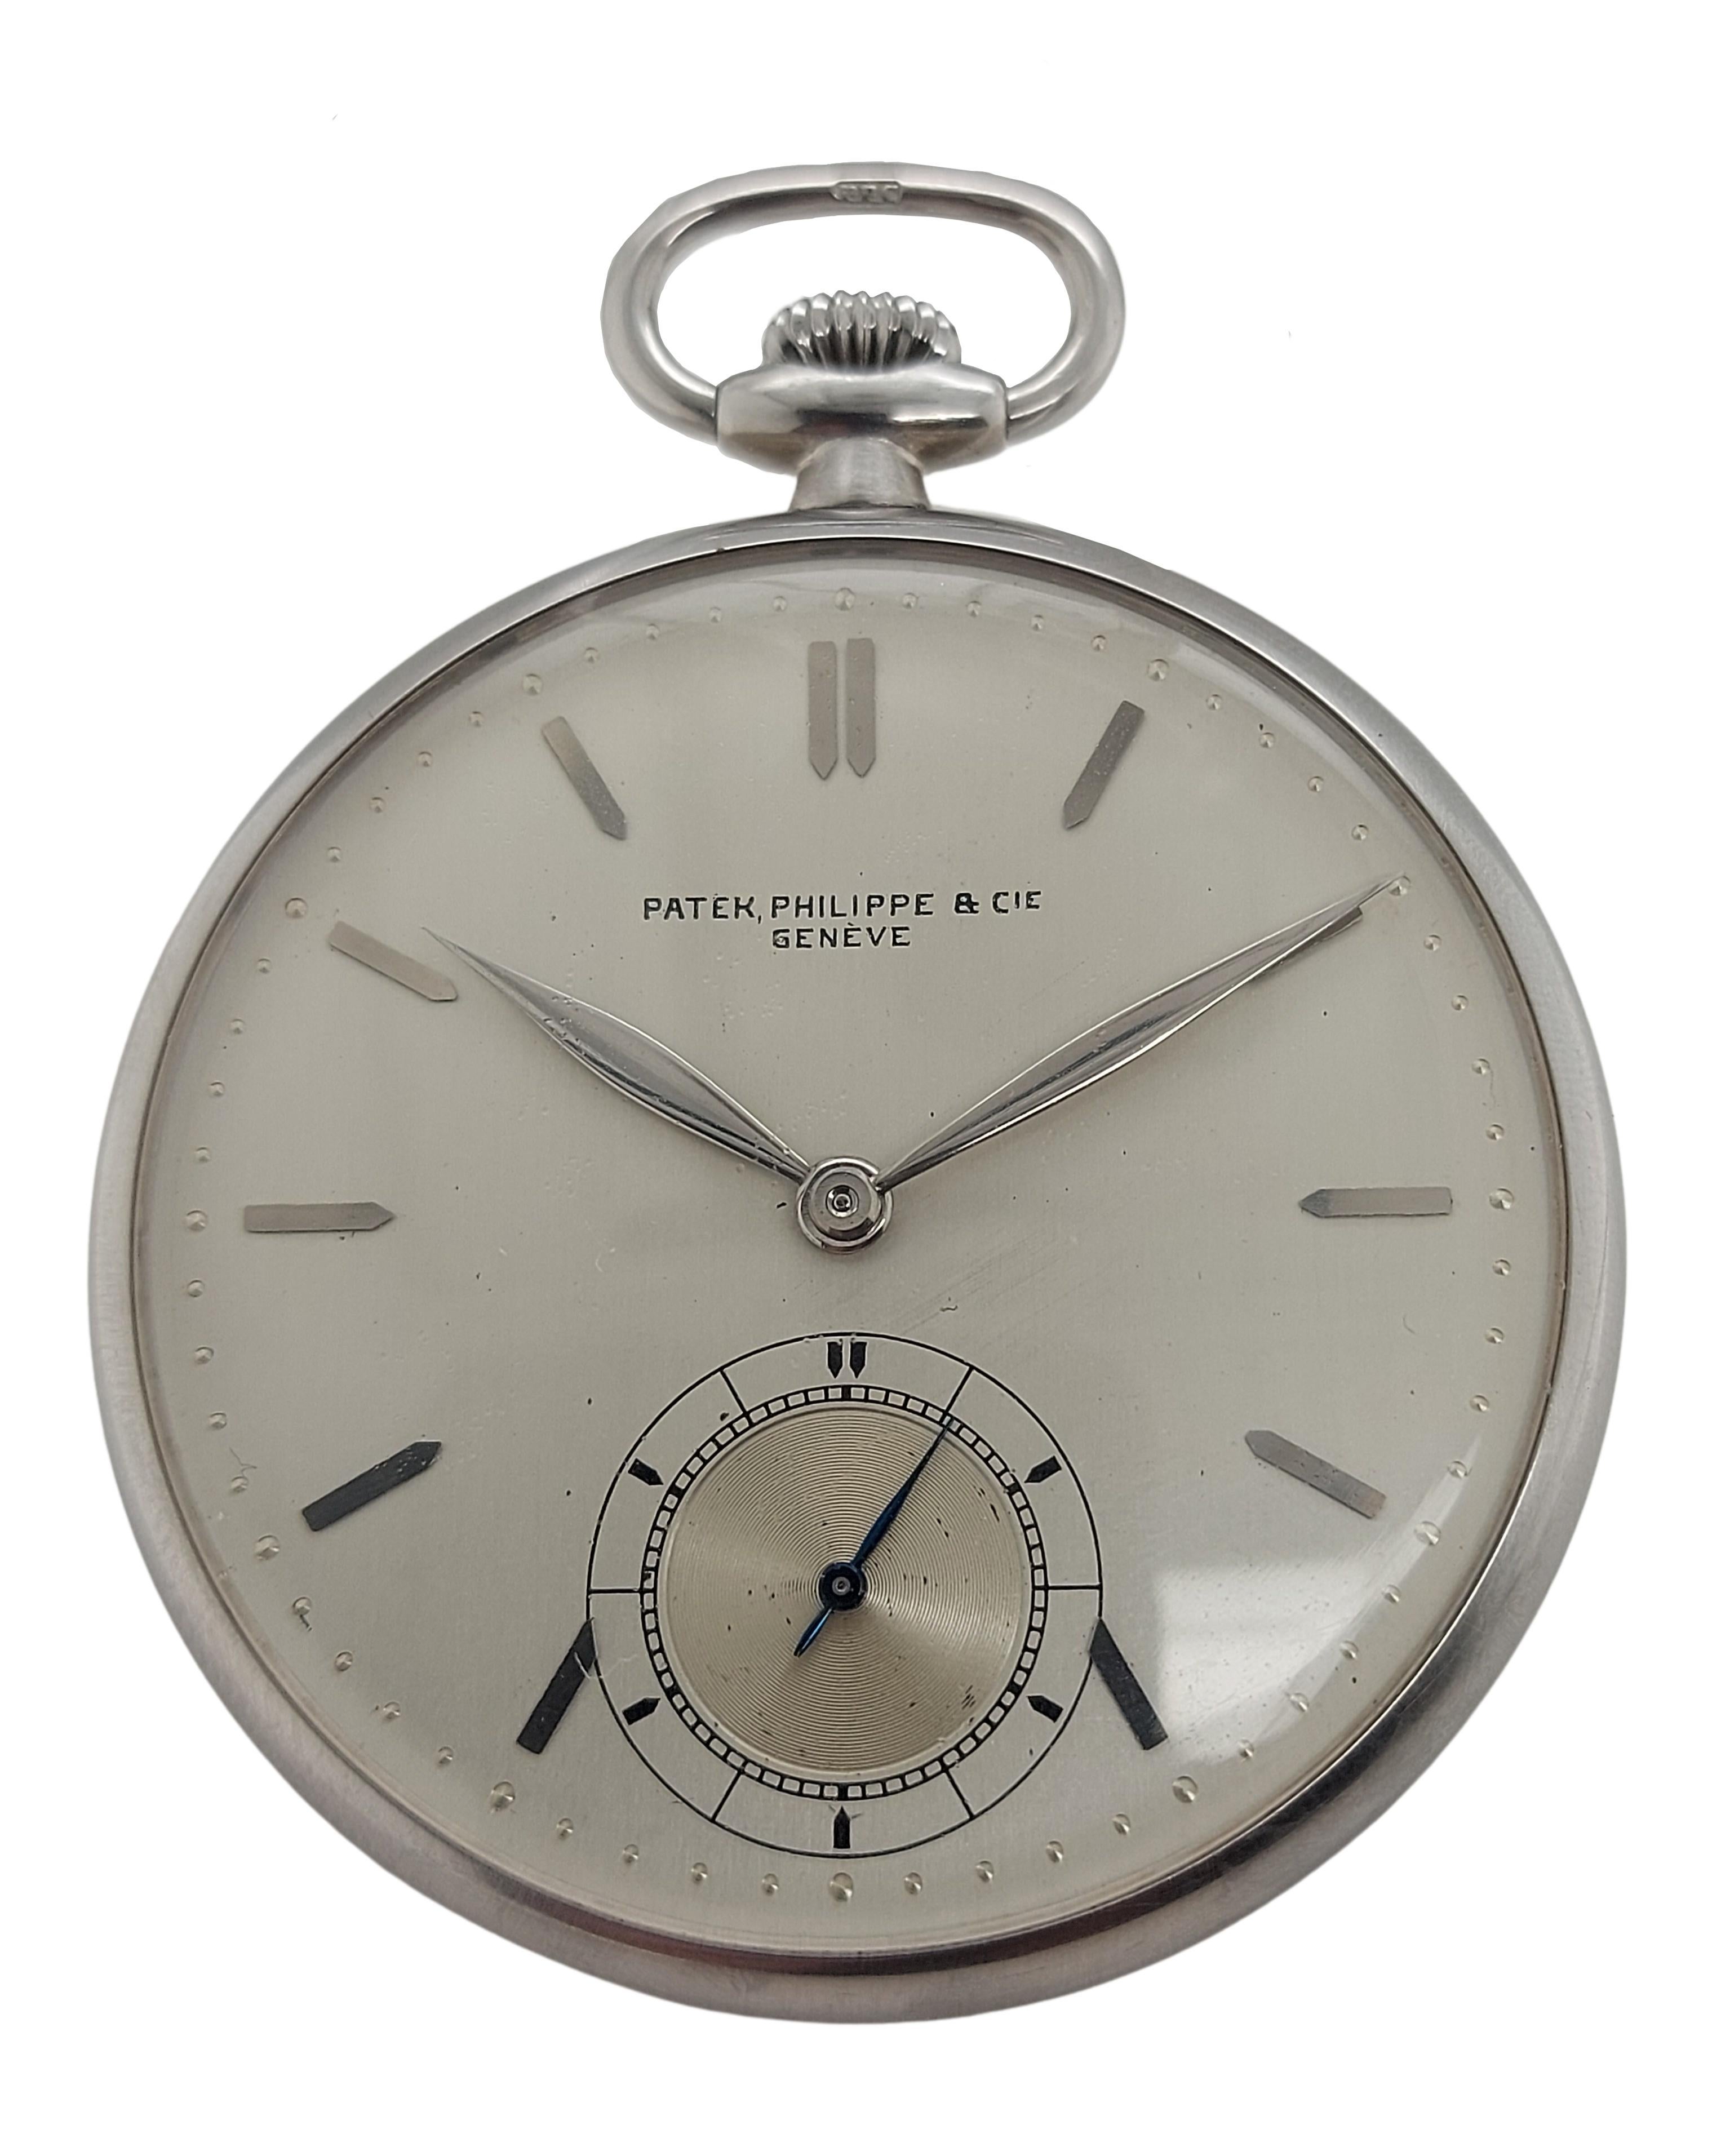 Magnificent Staybrite Steel Patek Philip & Cie Pocket Watch 

Extremely rare and Collectable in unseen condition !

Movement: Mechanical Manual Winding with extra fine regulation and seal of Geneva

Case: Steel case, Diameter 46.5 mm, Thickness 10